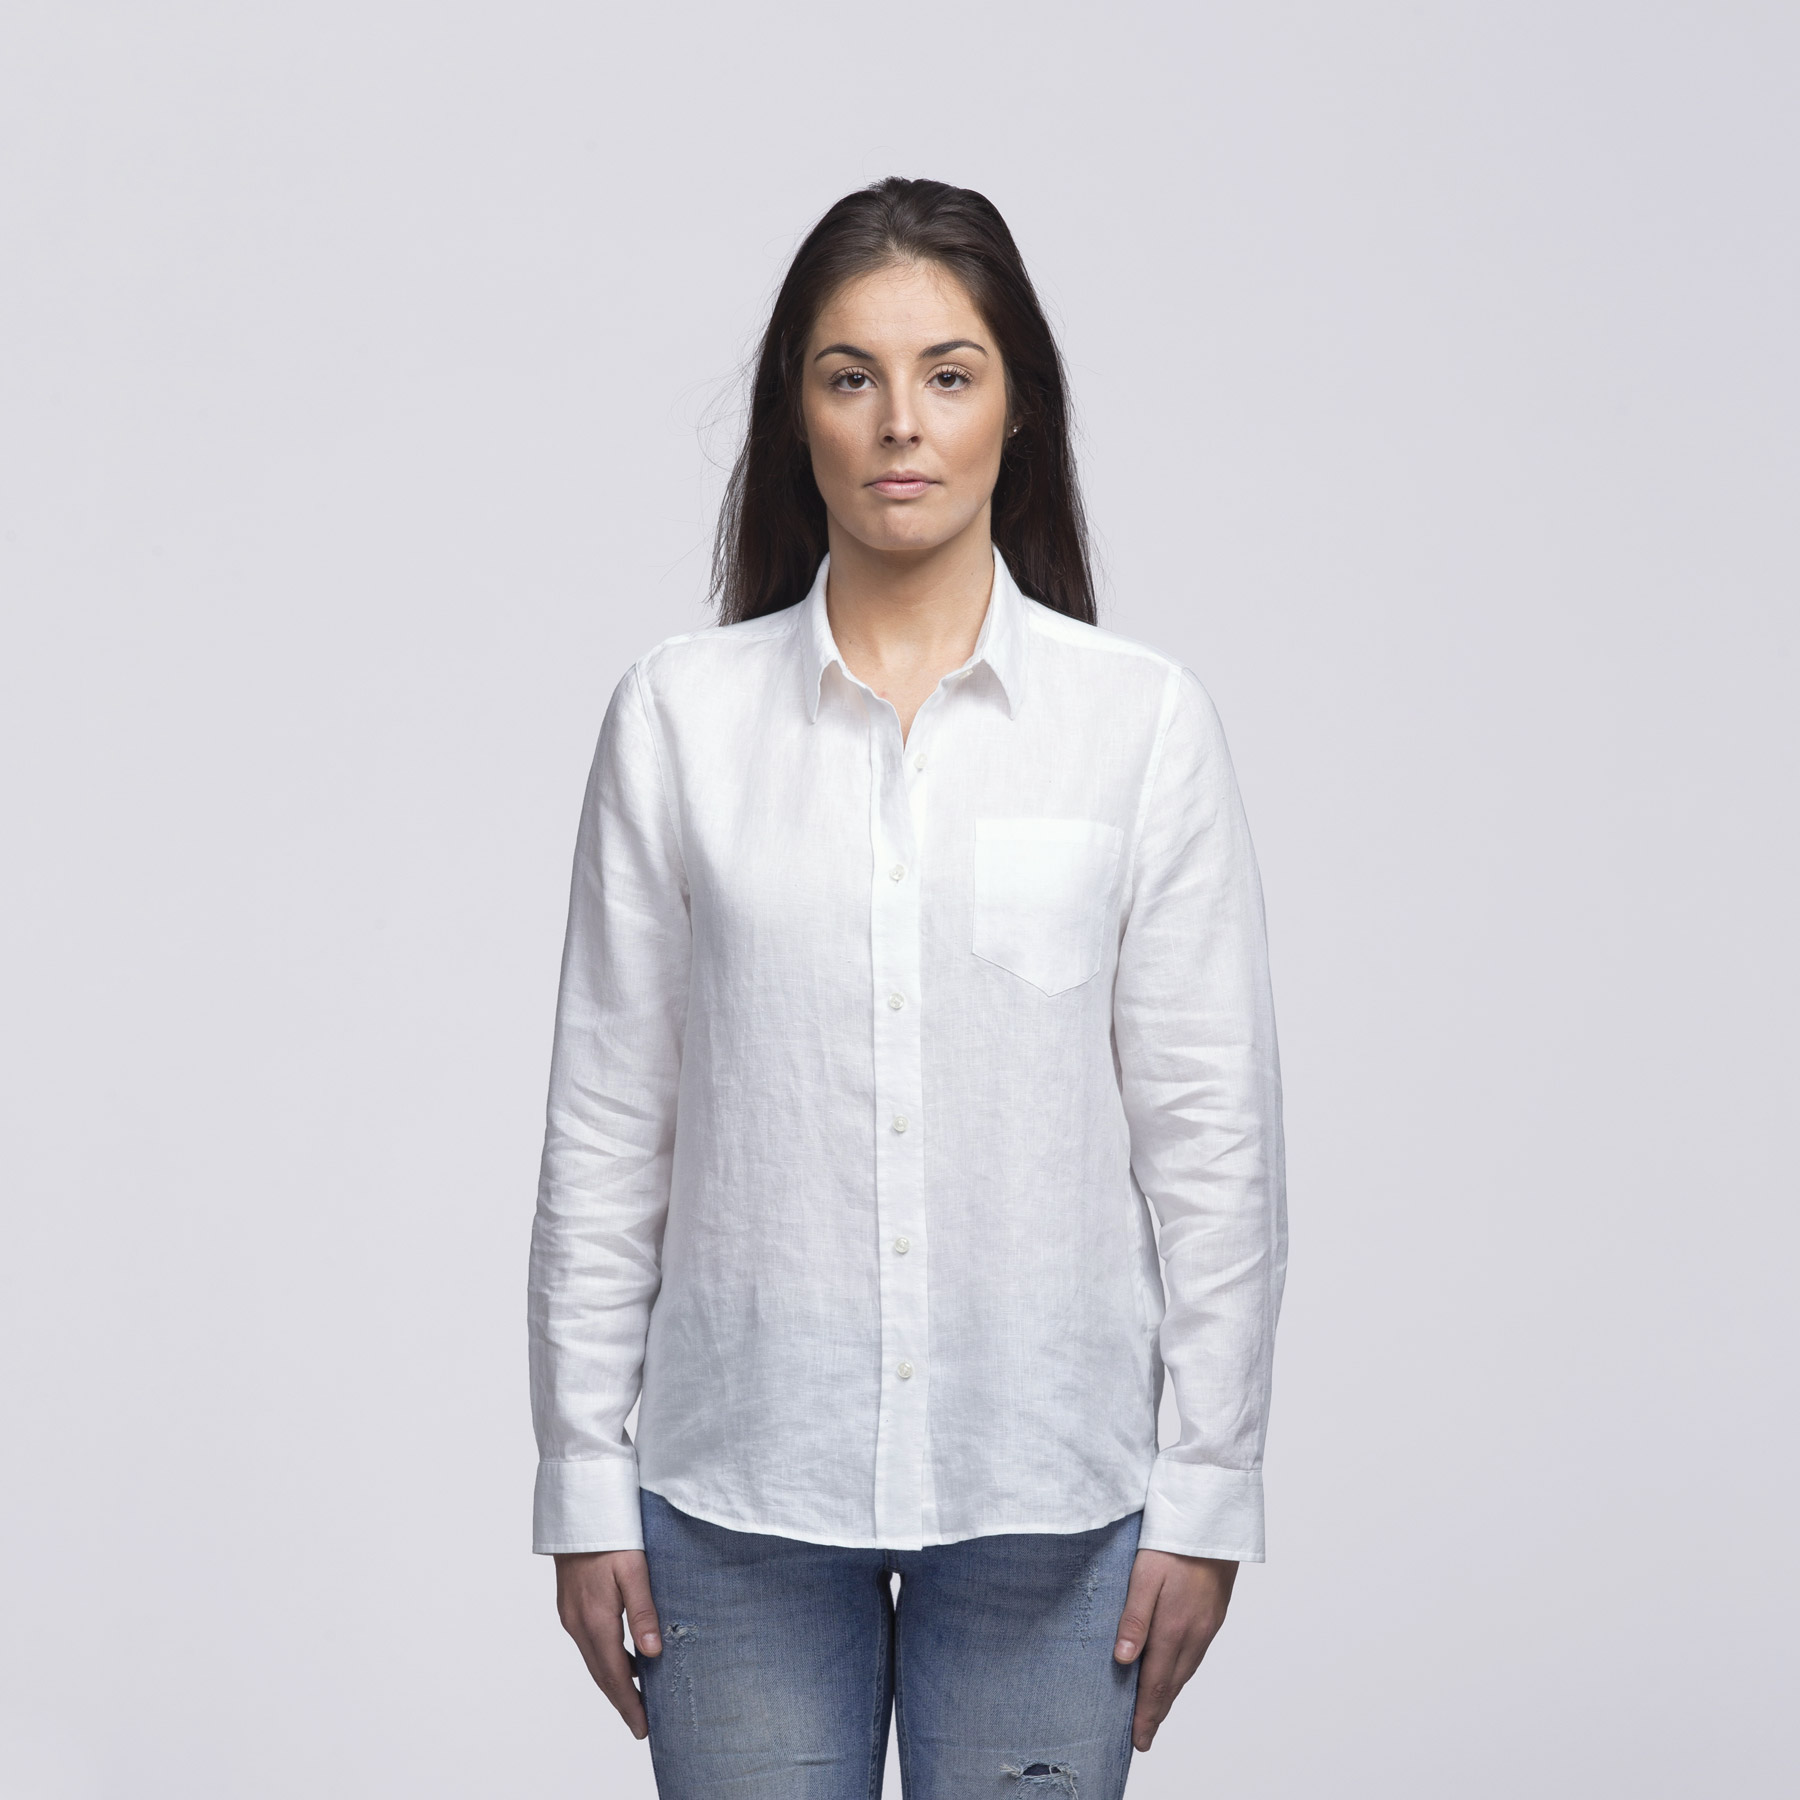 How to wear a white linen shirt Ladies | Dresses Images 2022 | Page 4